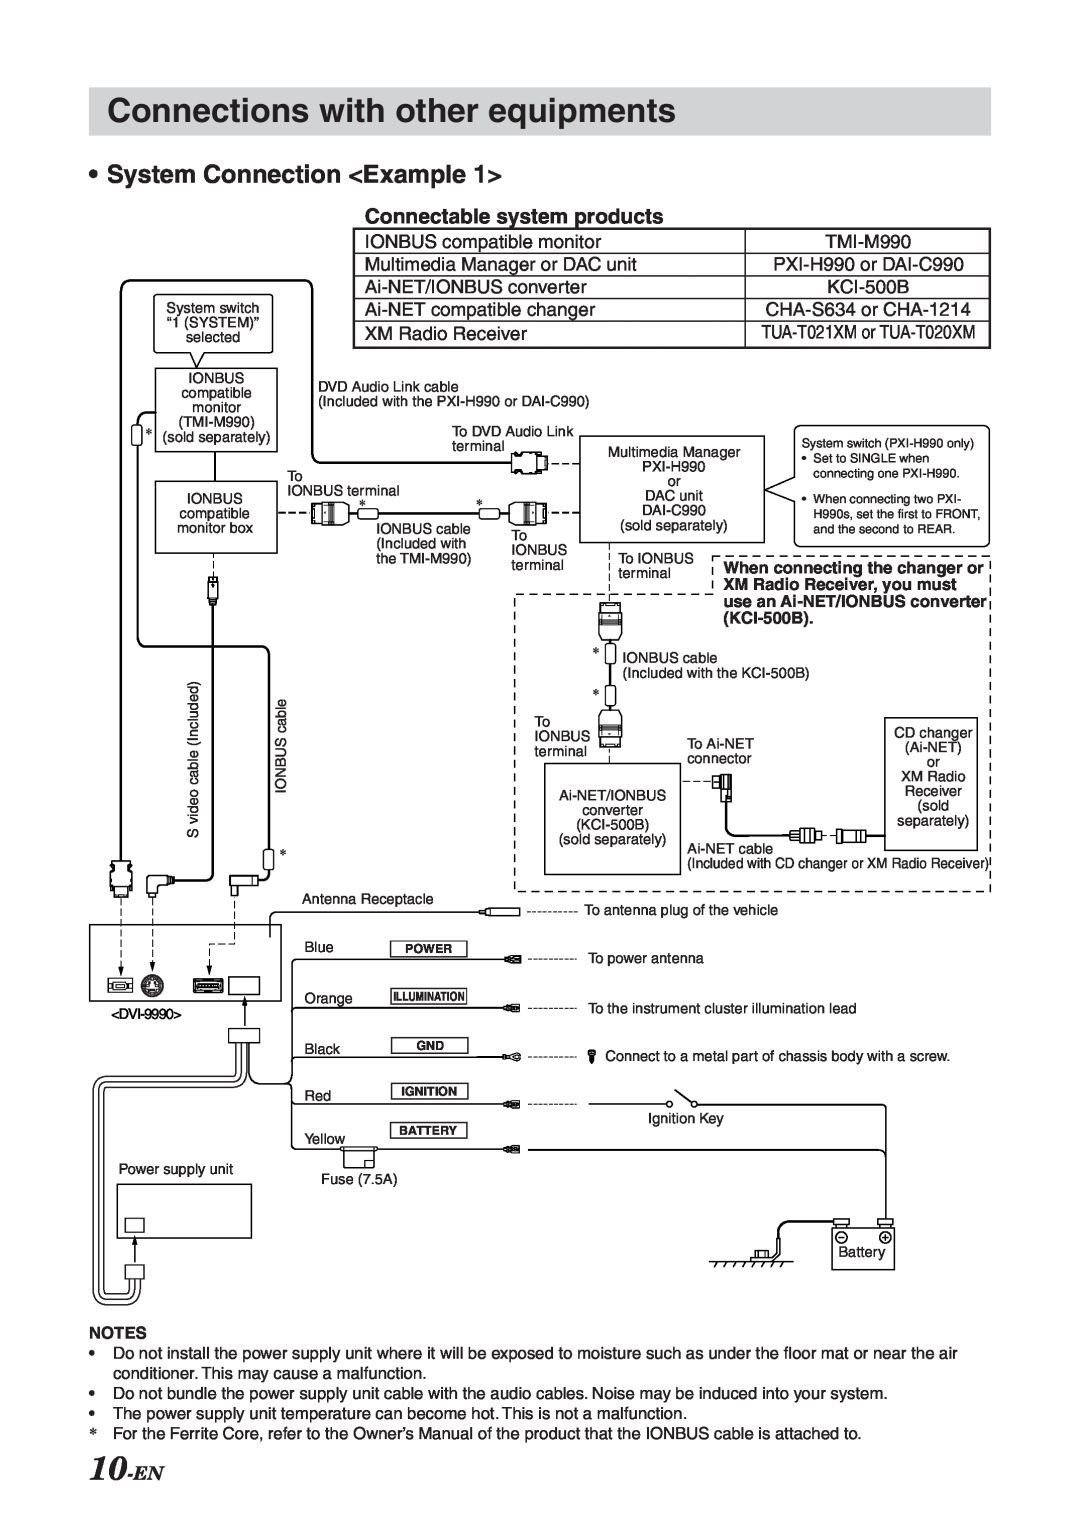 Alpine DVI-9990 System Connection Example, Connections with other equipments, IONBUS compatible monitor, TMI-M990, 10-EN 